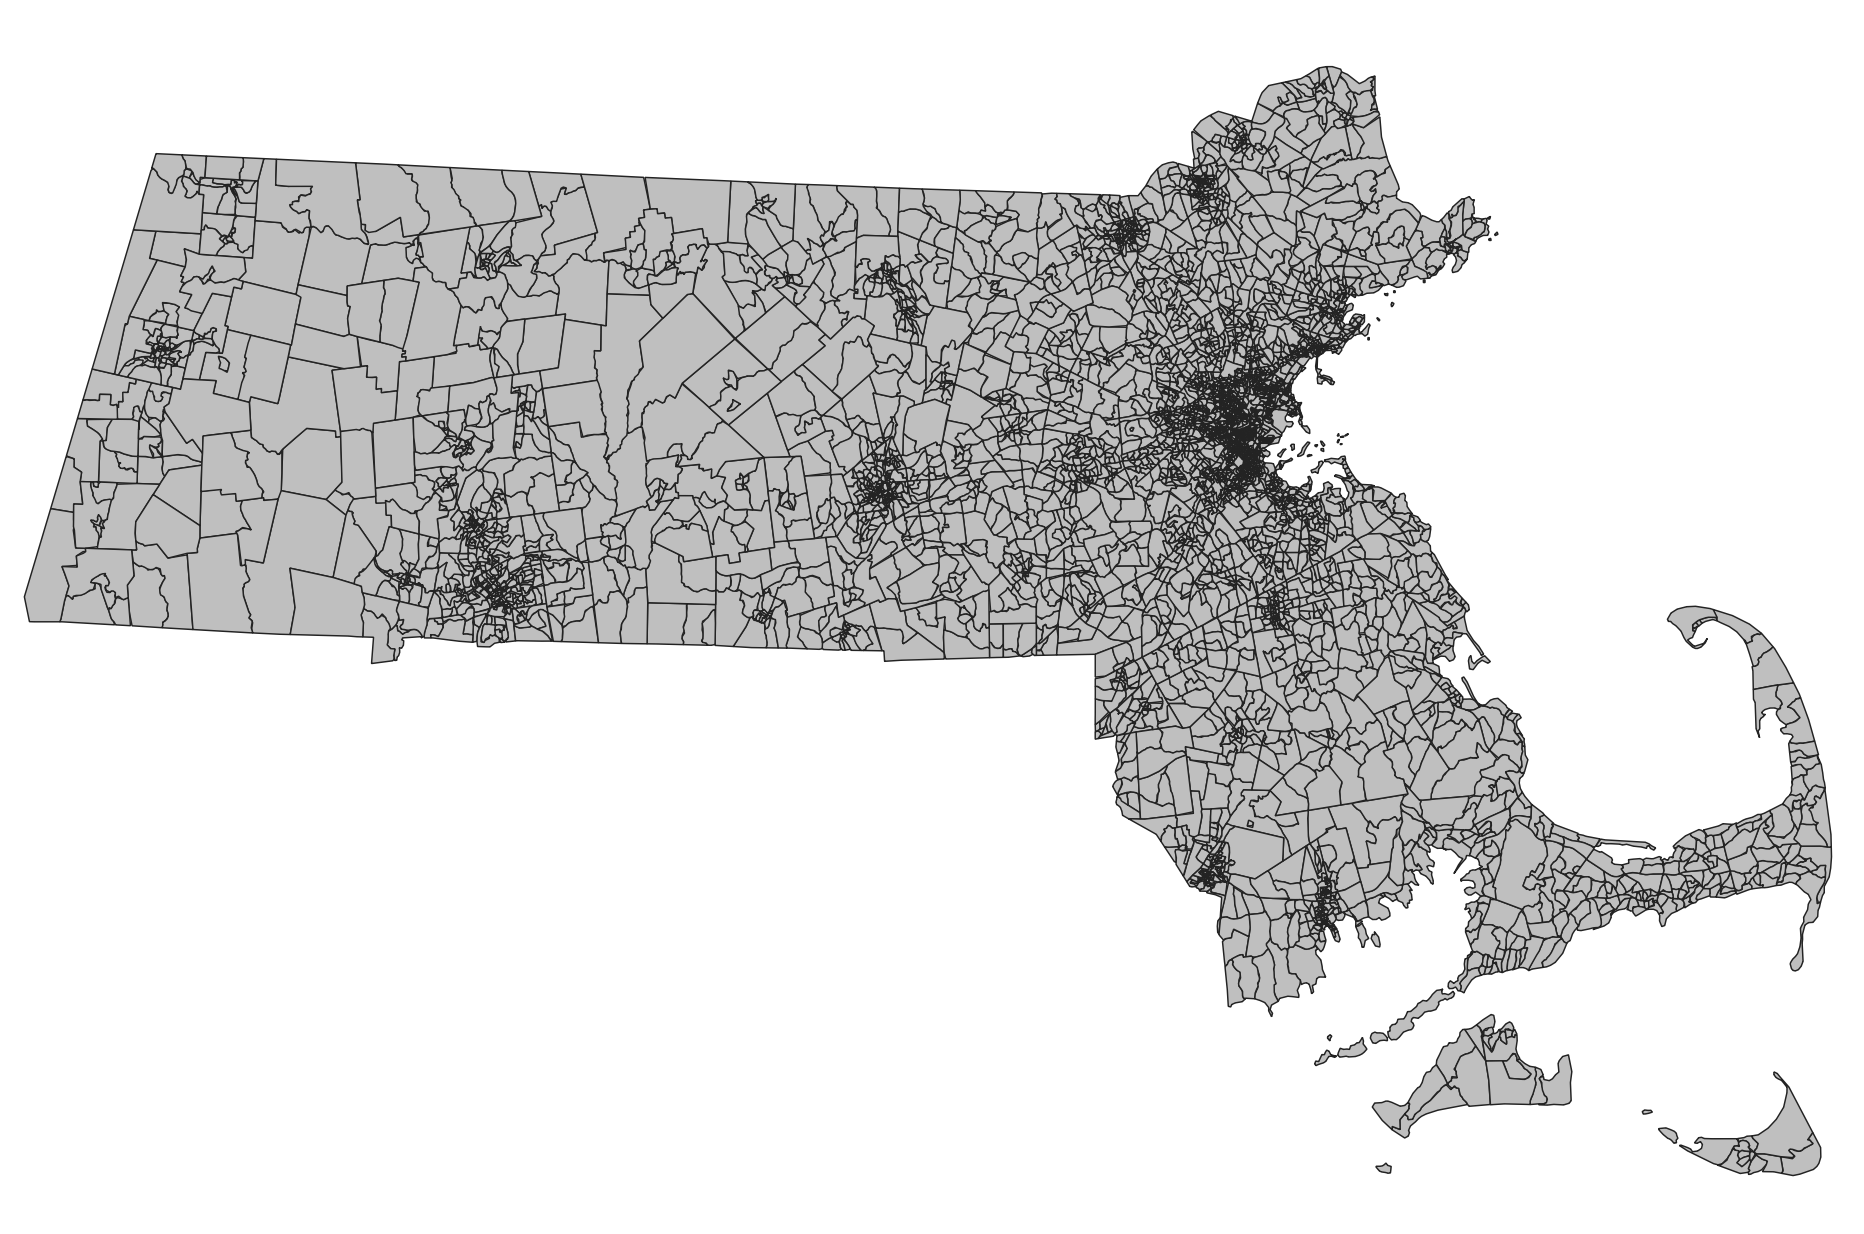 Block groups in MA from the 2020 US Census, all styled as gray polygons